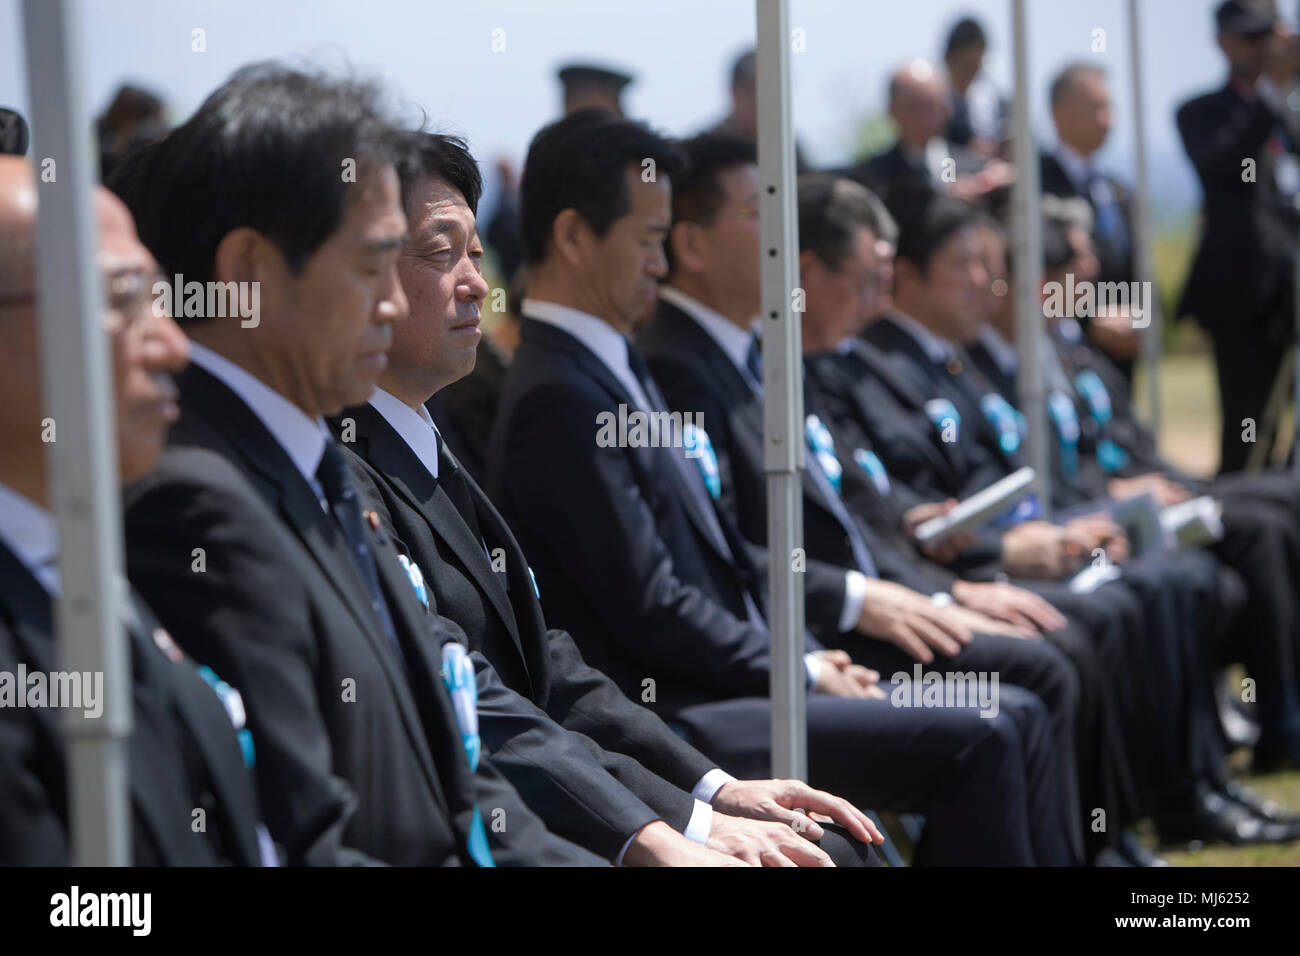 Yoshitaka Shindo, a member of the Japanese house of Representatives and grandson of General Tadamichi Kuribayashi, the commander of the Japanese forces that defended Iwo Jima, listens along with his fellow countrymen as Mr. Katsunobu Kato, the Japanese Minister of Health, Labour and Welfare, addresses the audience during the 73rd Reunion of Honor March 24, 2018 at Iwo To, Japan. The Reunion of Honor was created to commemorate those who fought during the Battle of Iwo Jima. (U.S. Marine Corps Image collection celebrating the bravery dedication commitment and sacrifice of U.S. Armed Forces and c Stock Photo